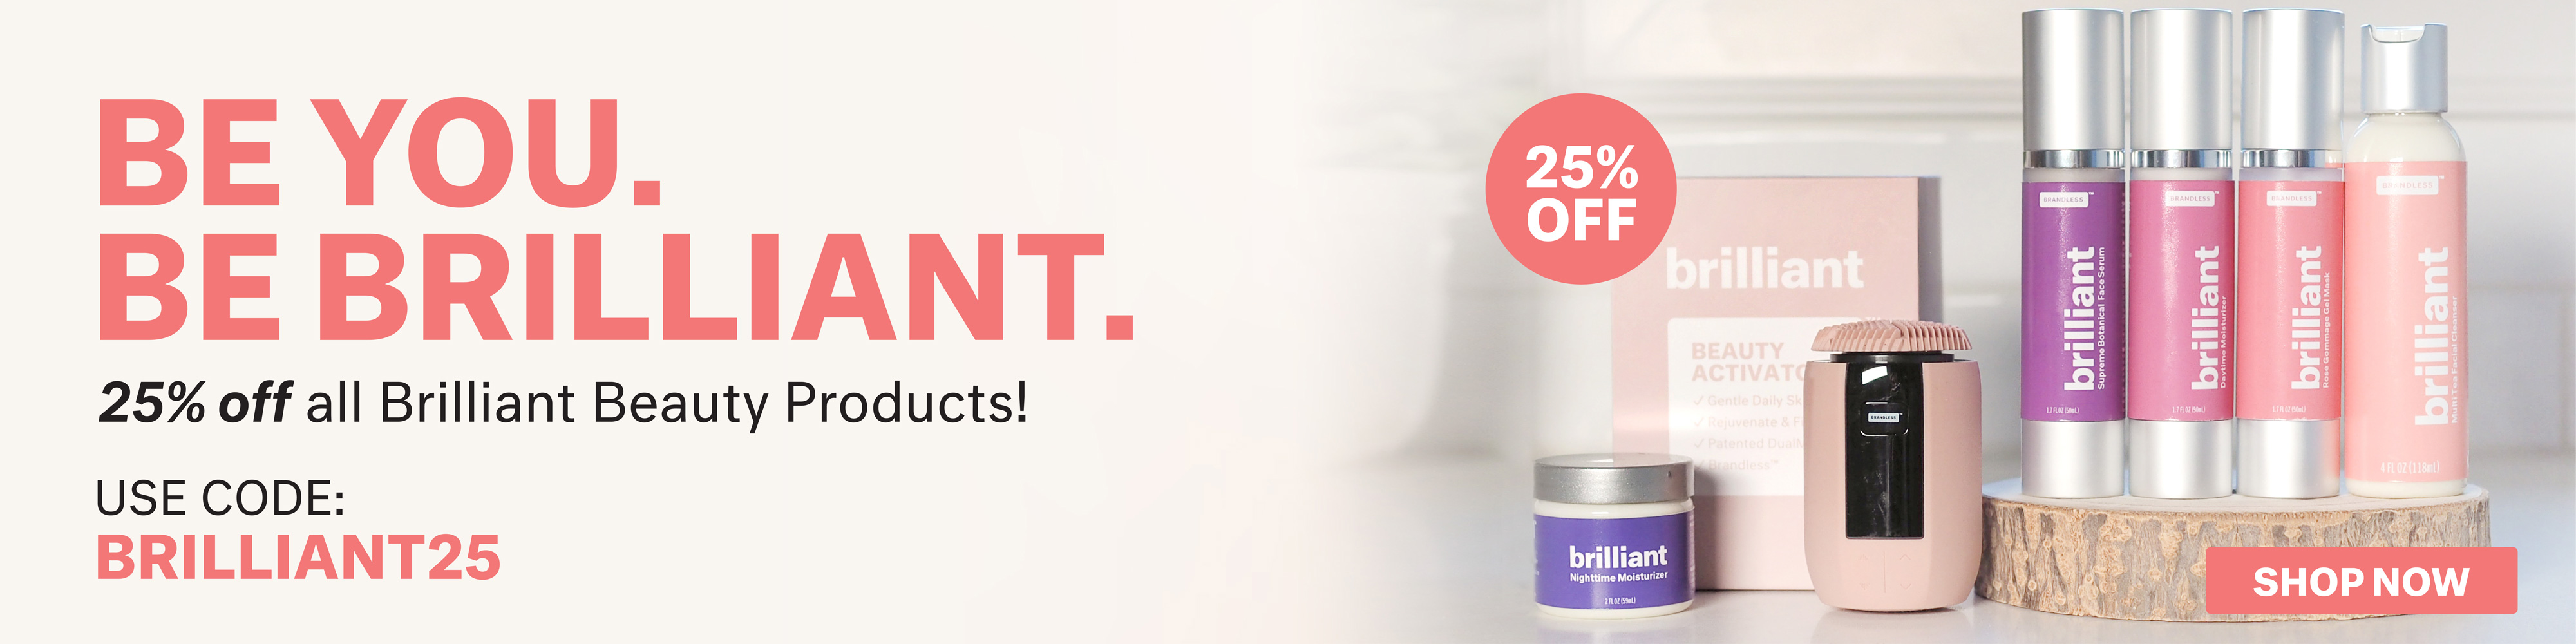 Be you.  Be brilliant.  25% off all Brilliant Beauty Products!  Use Code: BRILLIANT25